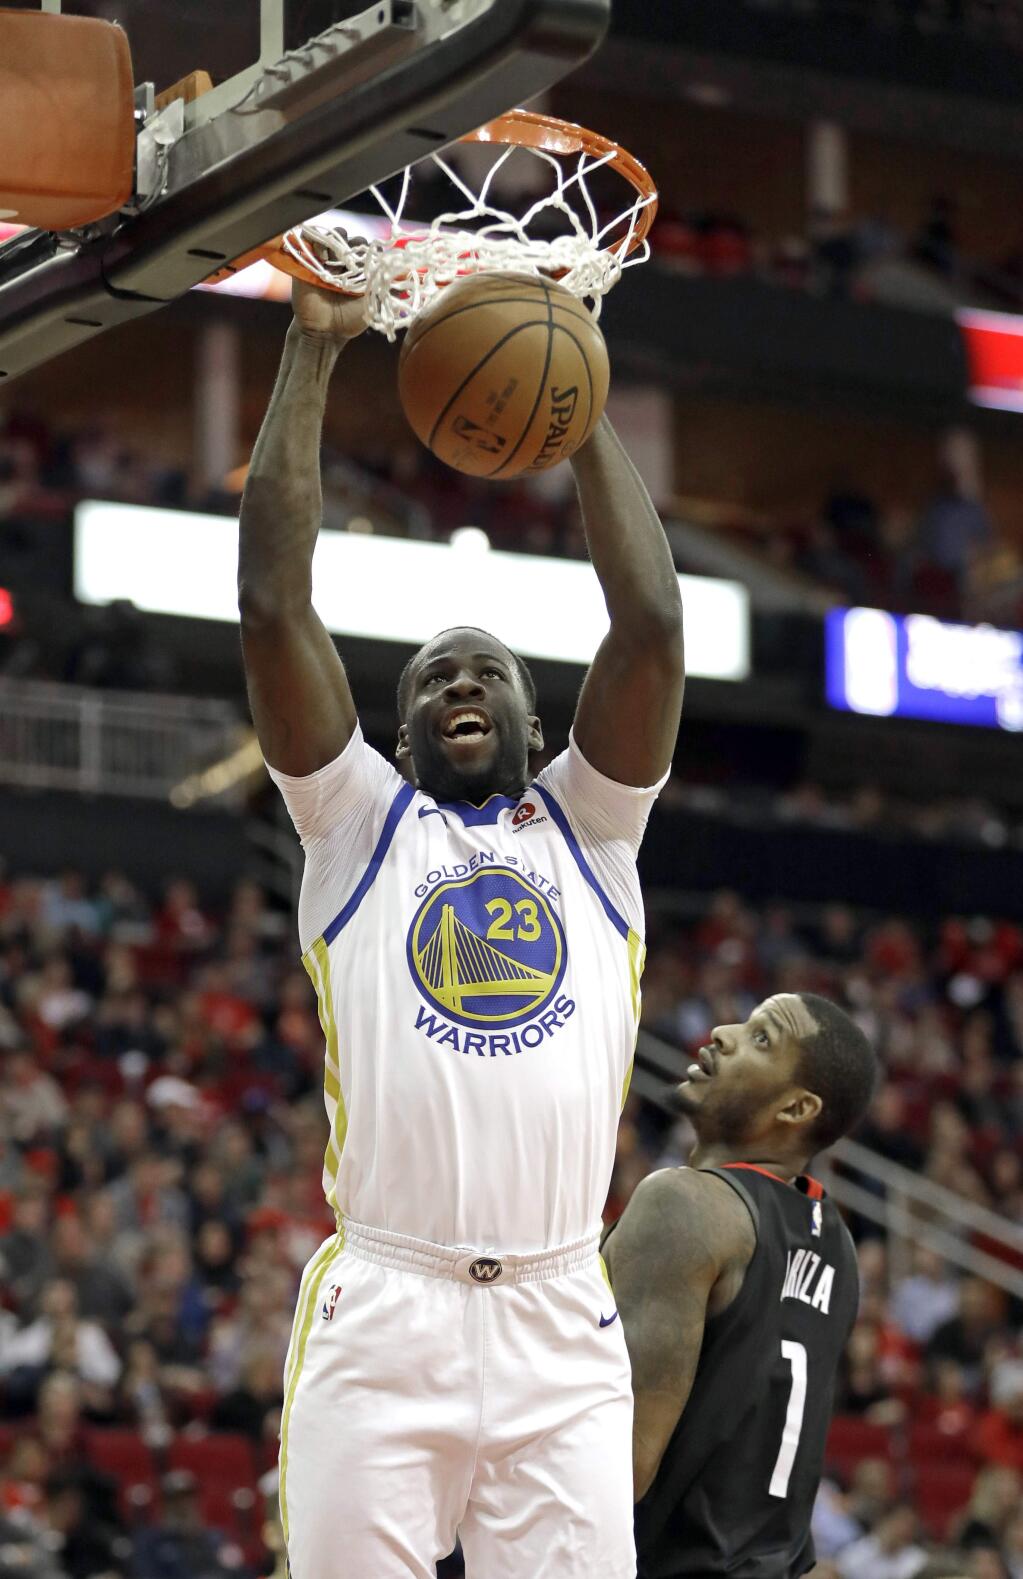 Golden State Warriors' Draymond Green (23) dunks the ball as Houston Rockets' Trevor Ariza (1) watches during the first half of an NBA basketball game Thursday, Jan. 4, 2018, in Houston. (AP Photo/David J. Phillip)